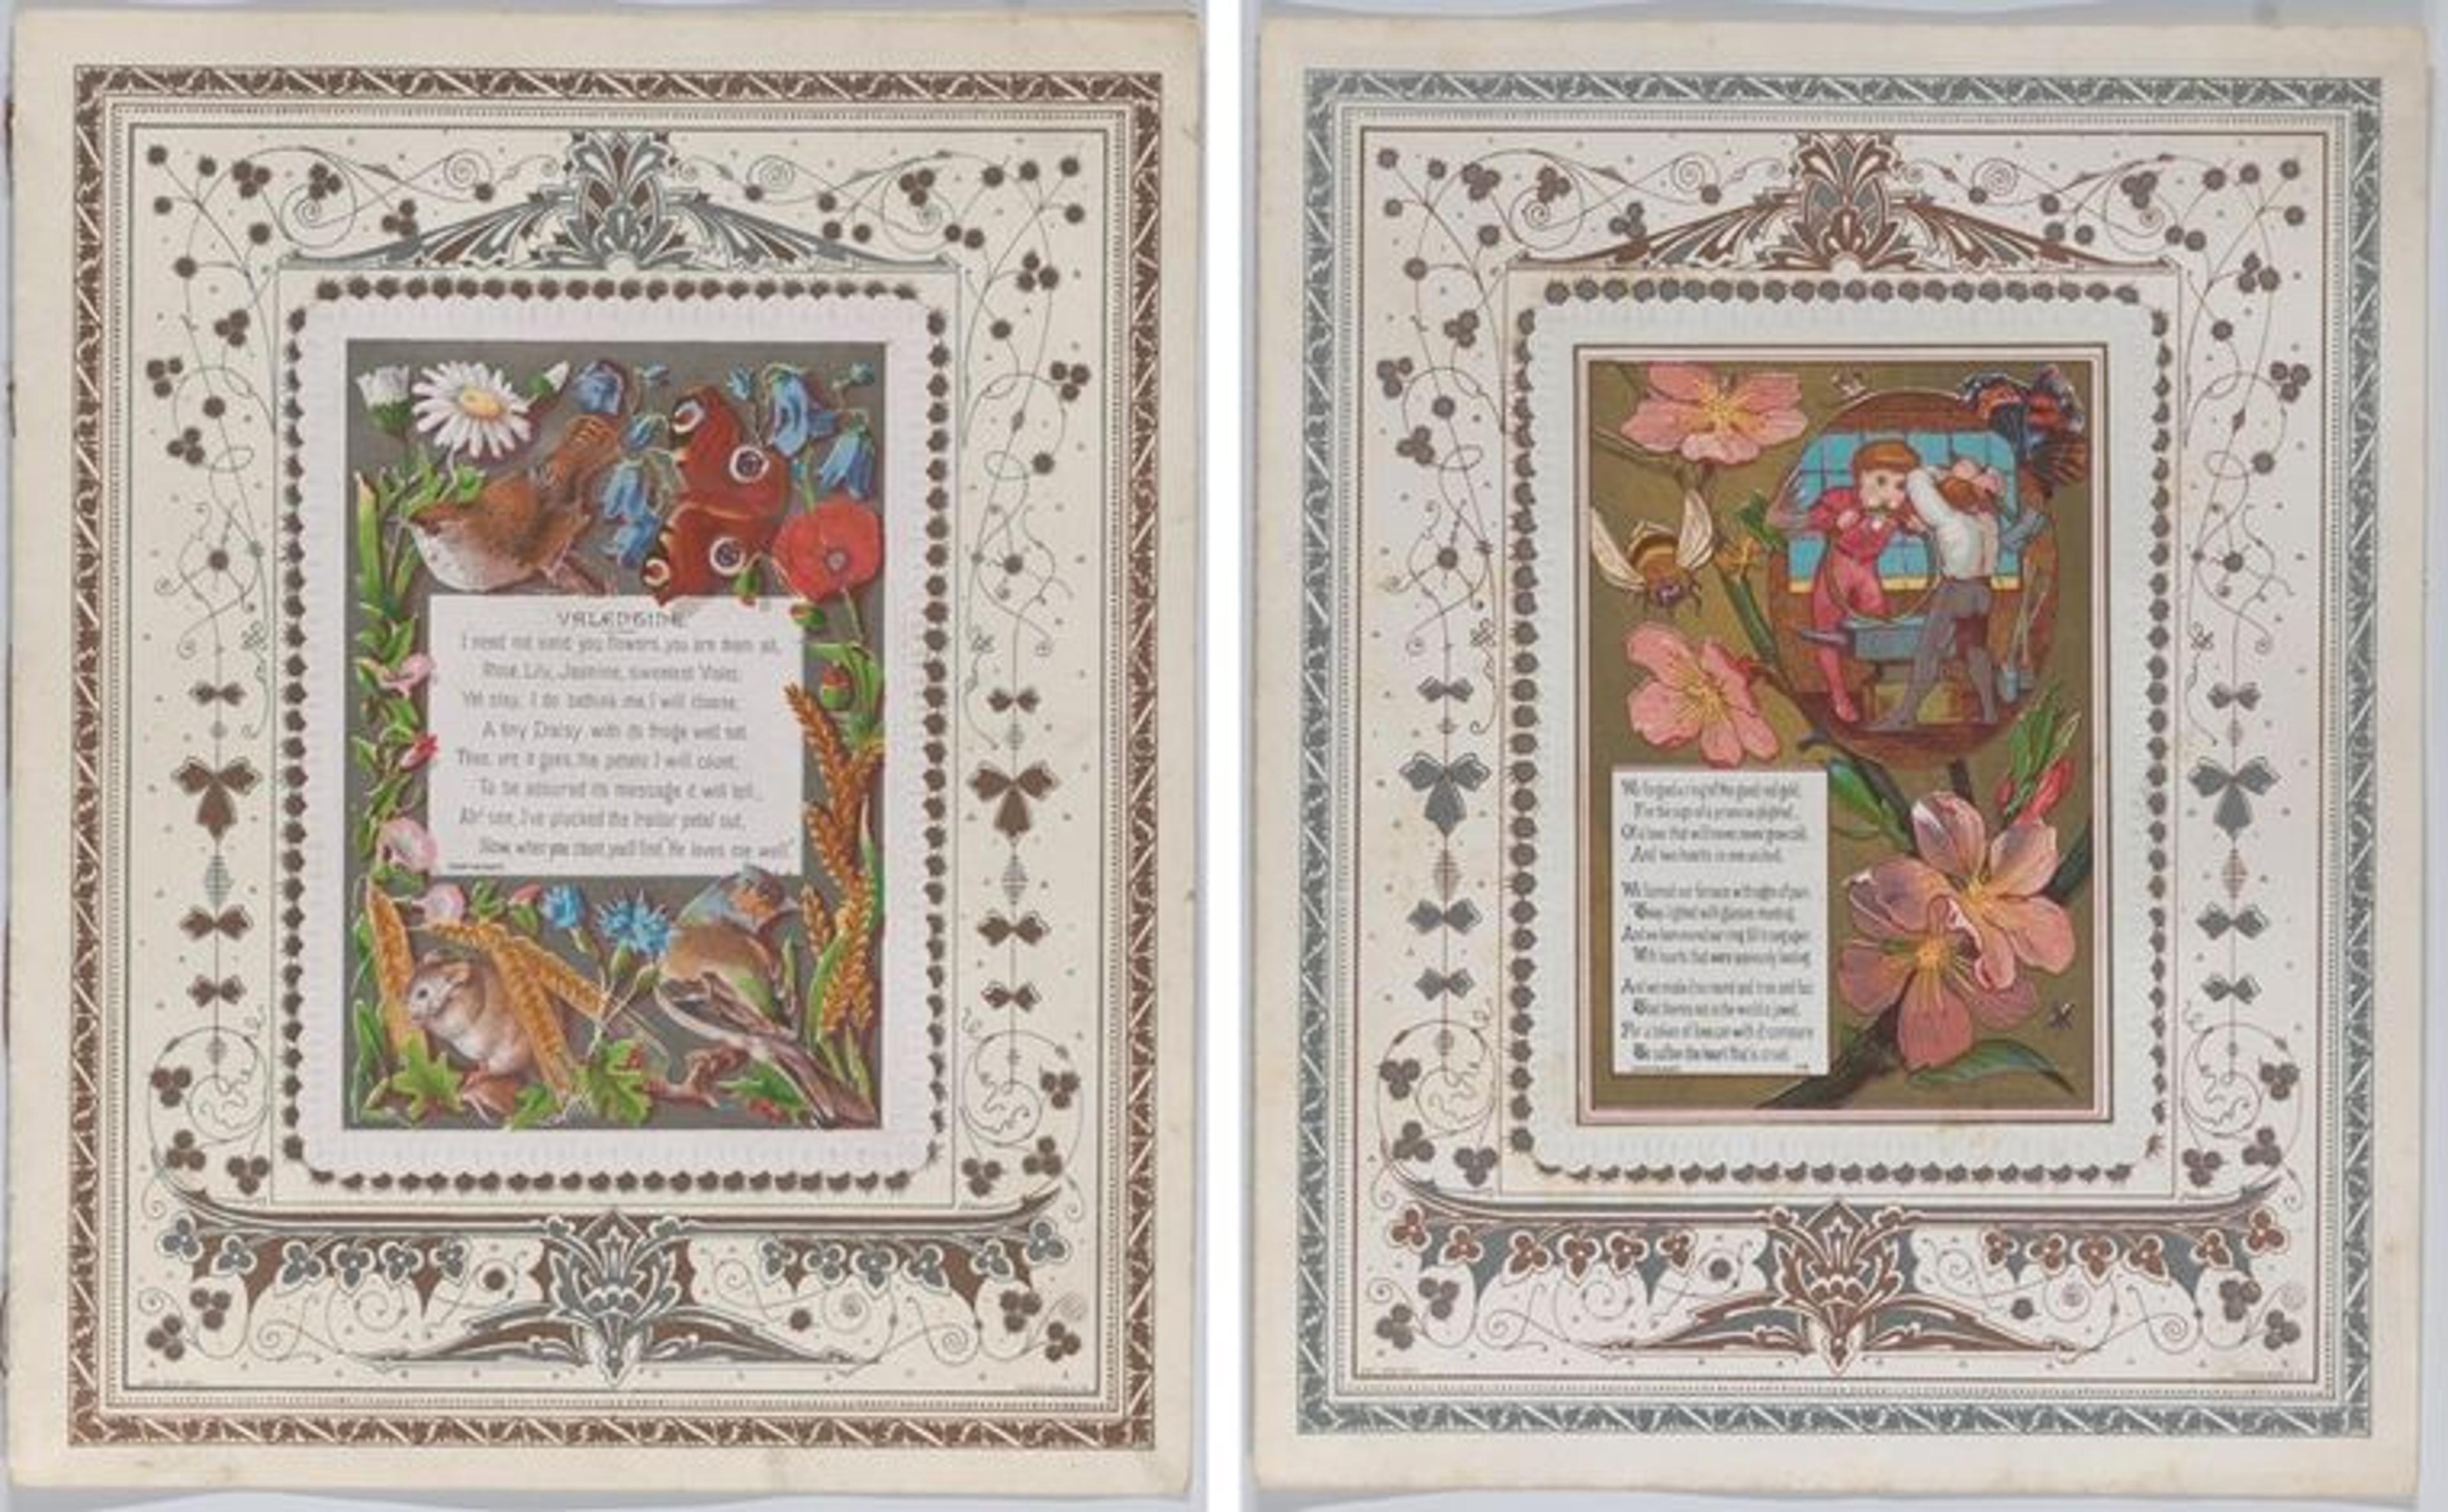 Two Kate Greenaway valentines depicting flowers, animals, and poetry